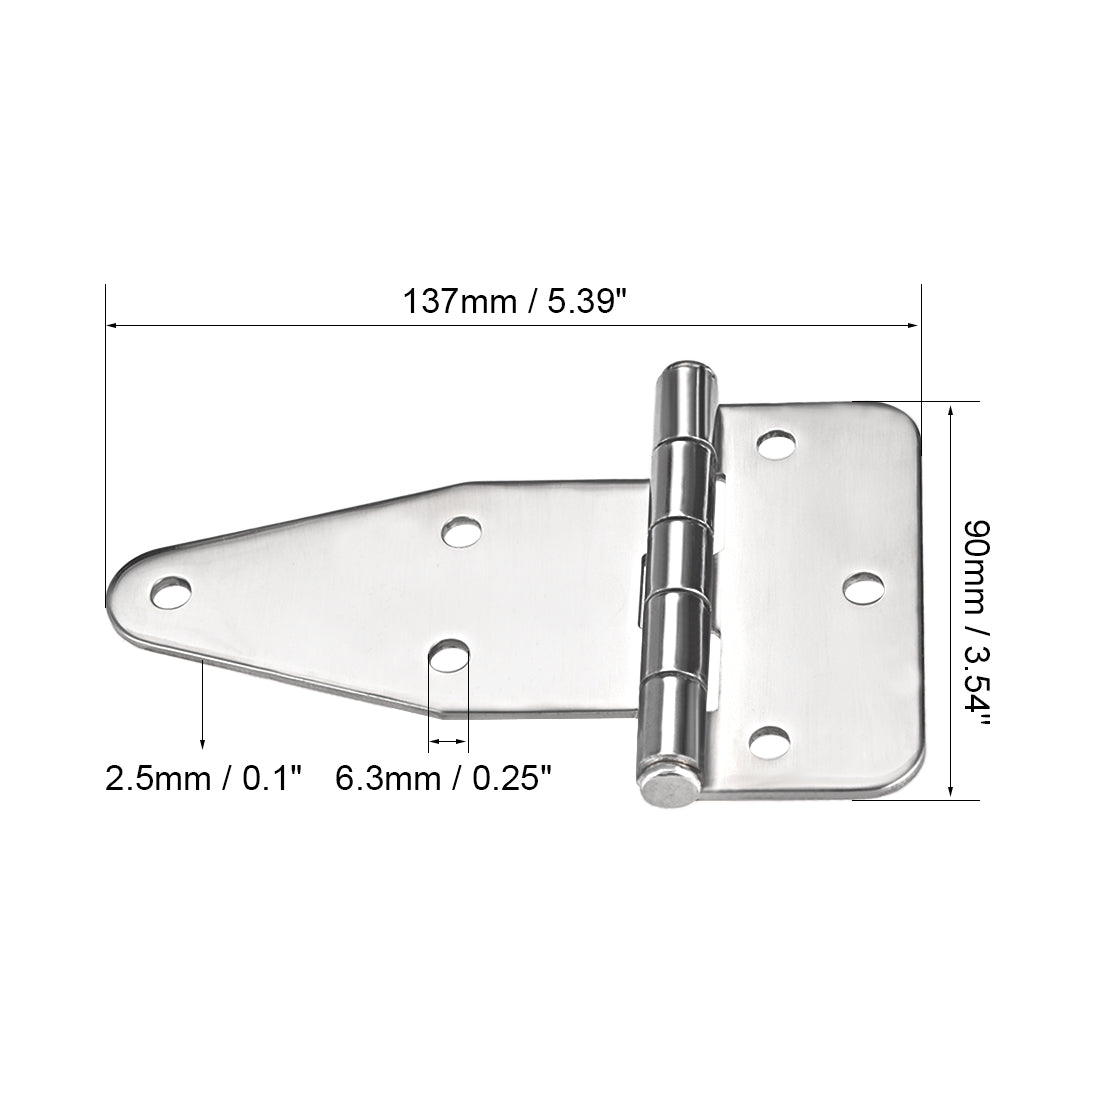 uxcell Uxcell T-Strap Heavy Shed Hinge Gate Door Hinges 304 Stainless Steel, 137mm Overall Length